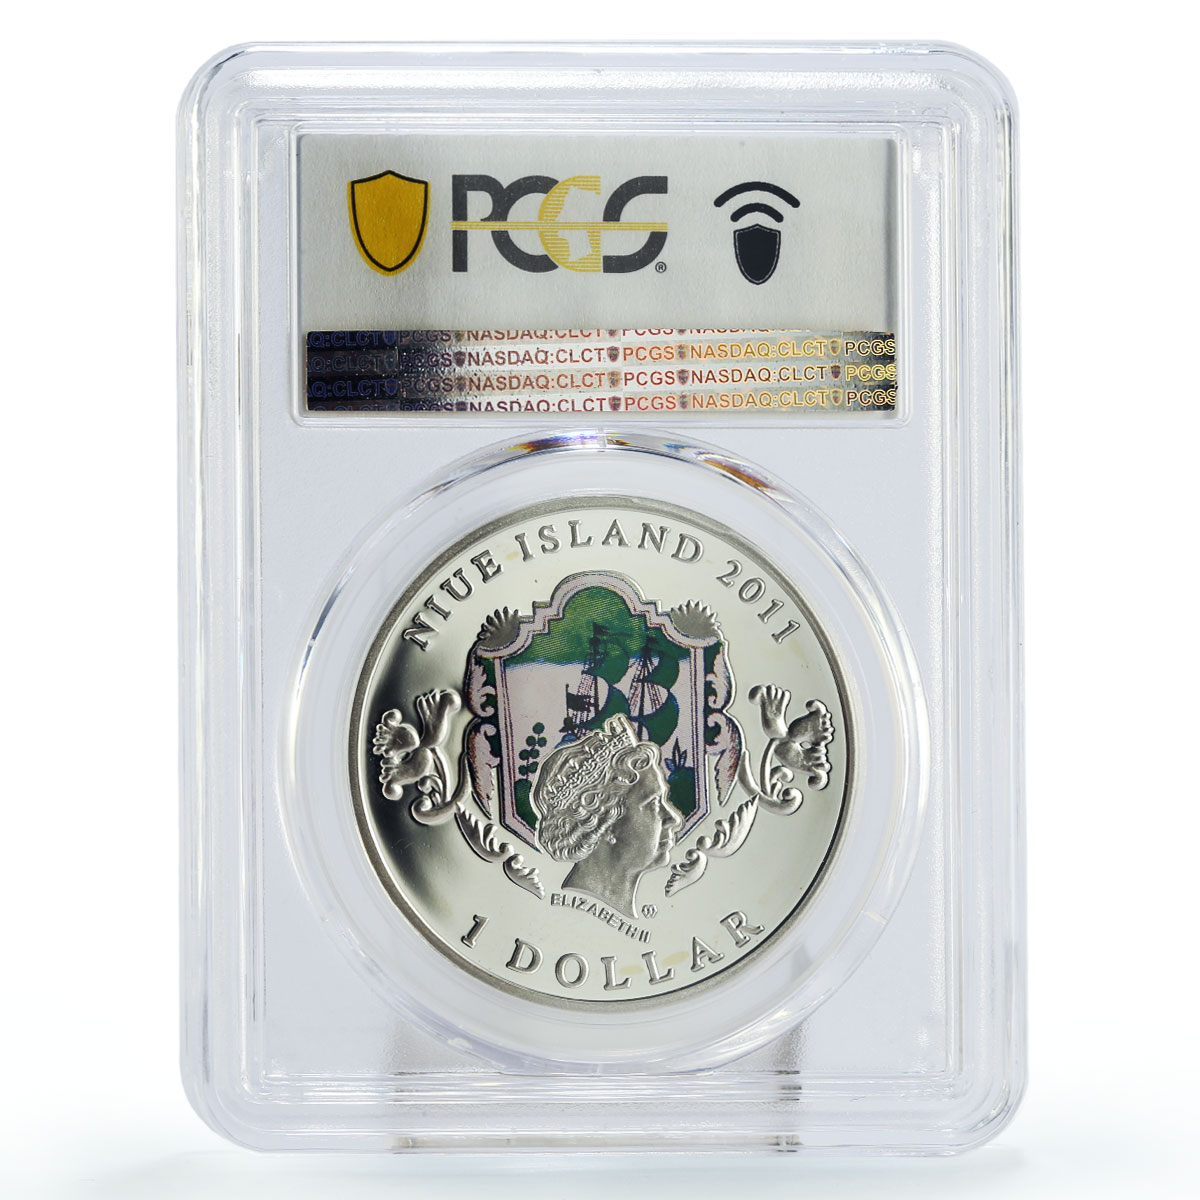 Niue 1 dollar Rock Opera Juno and Avos PR68 PCGS colored proof silver coin 2011